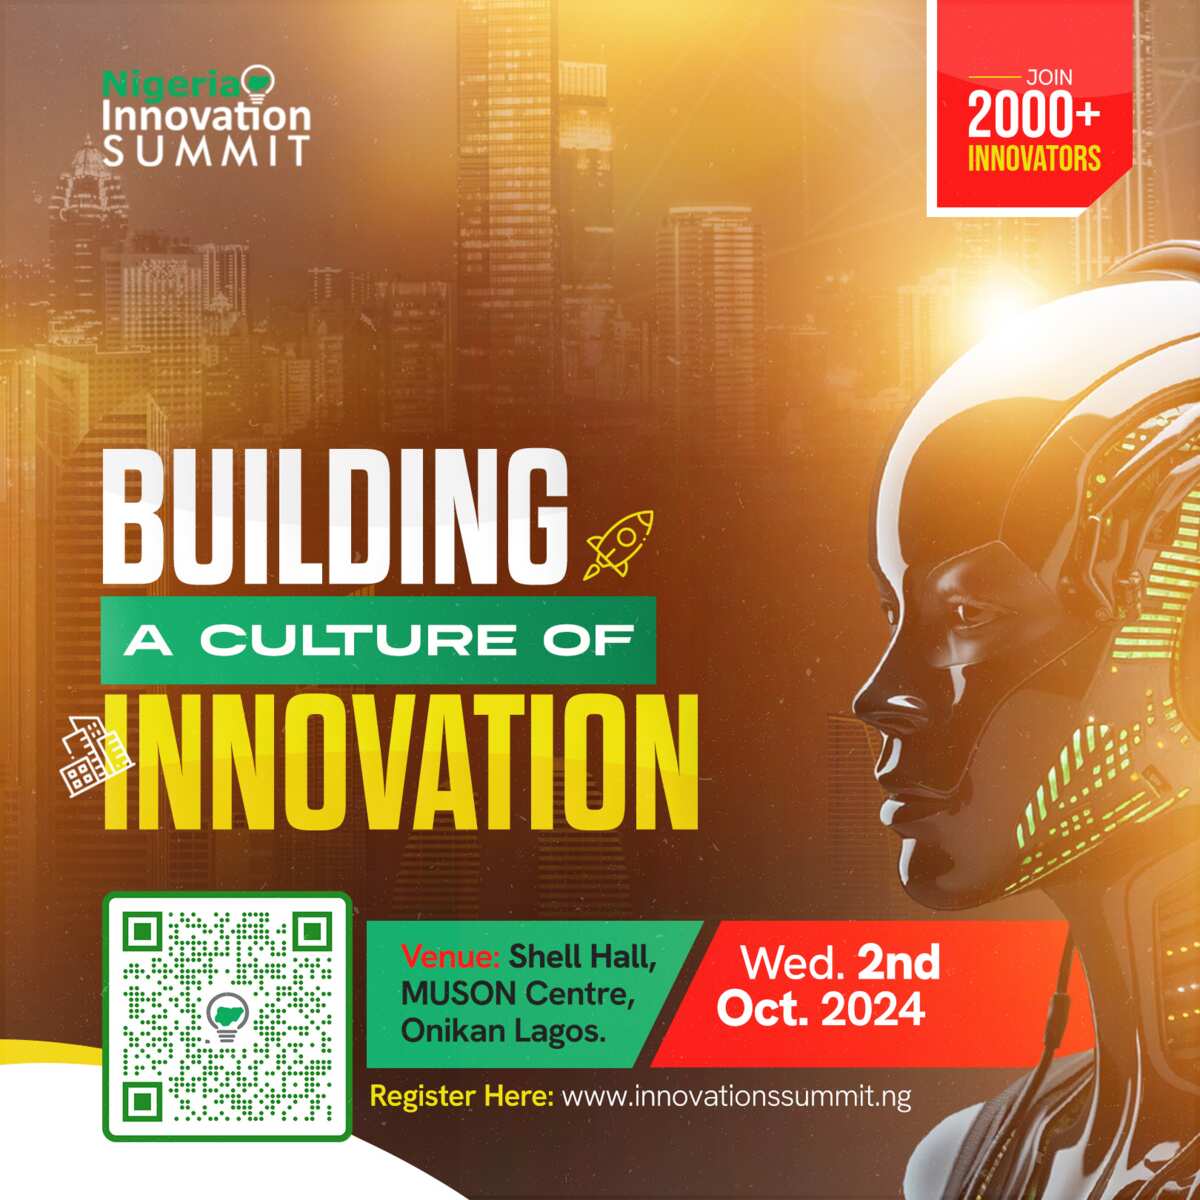 Nigeria Innovation Summit Returns for 9th Edition on 2nd October 2024